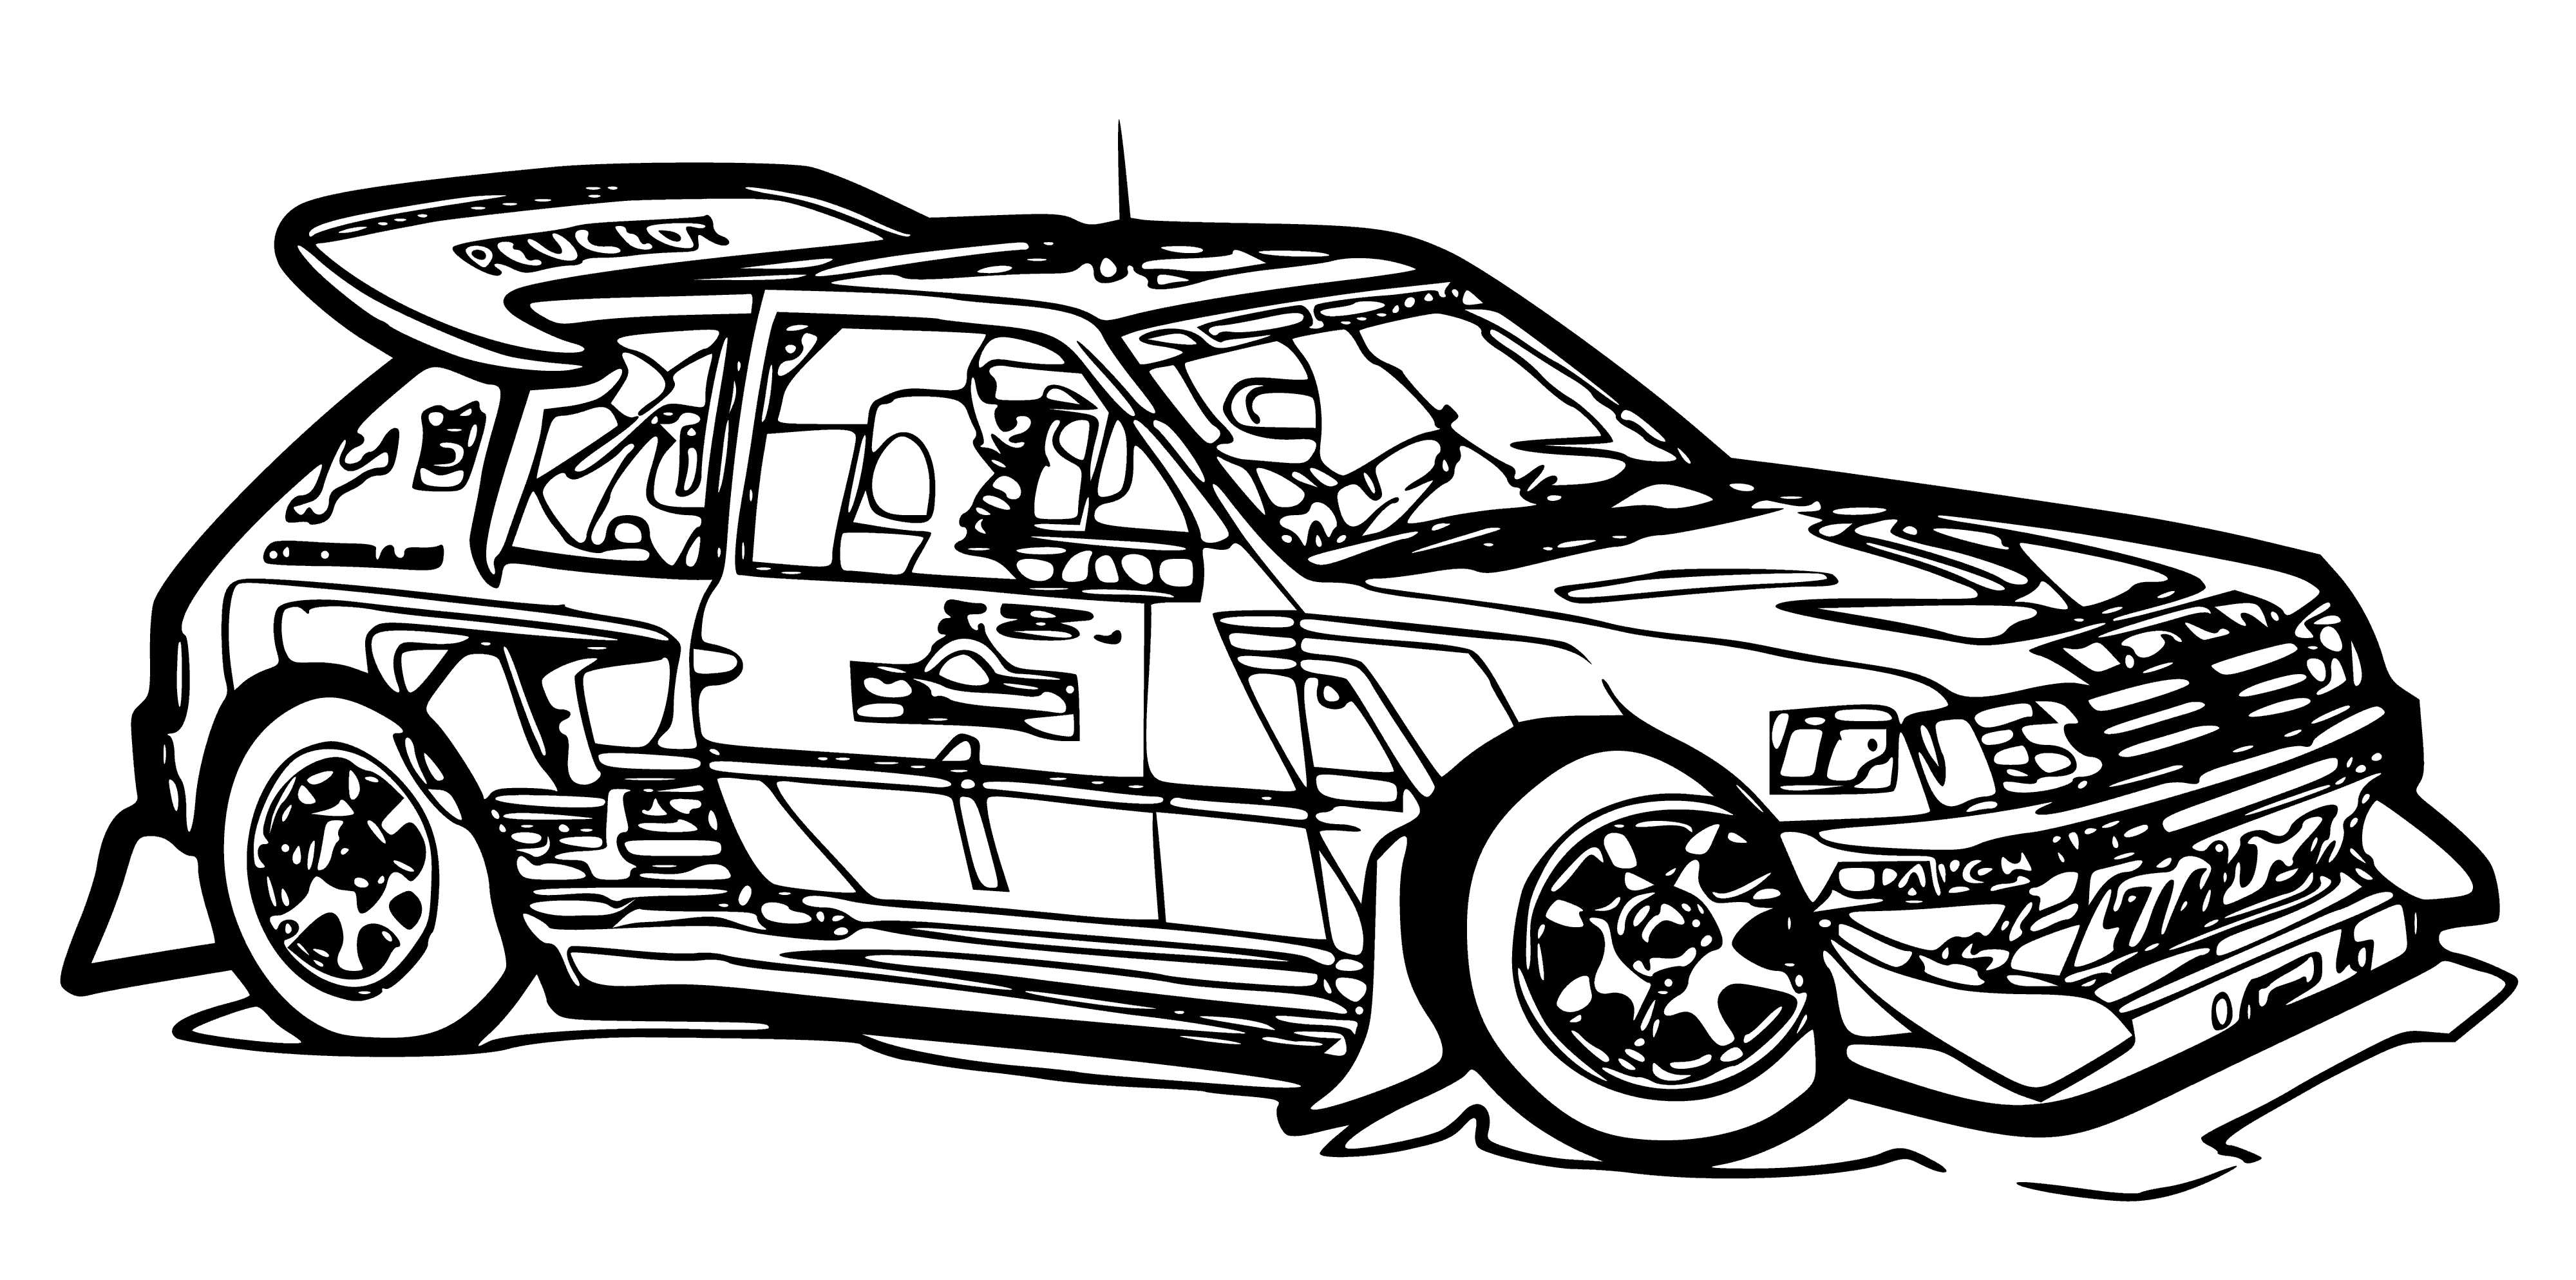 coloring page: Racing-themed coloring page with cars, people, race & parked cars. Spectators & drivers race for glory with cars of different designs & colors.